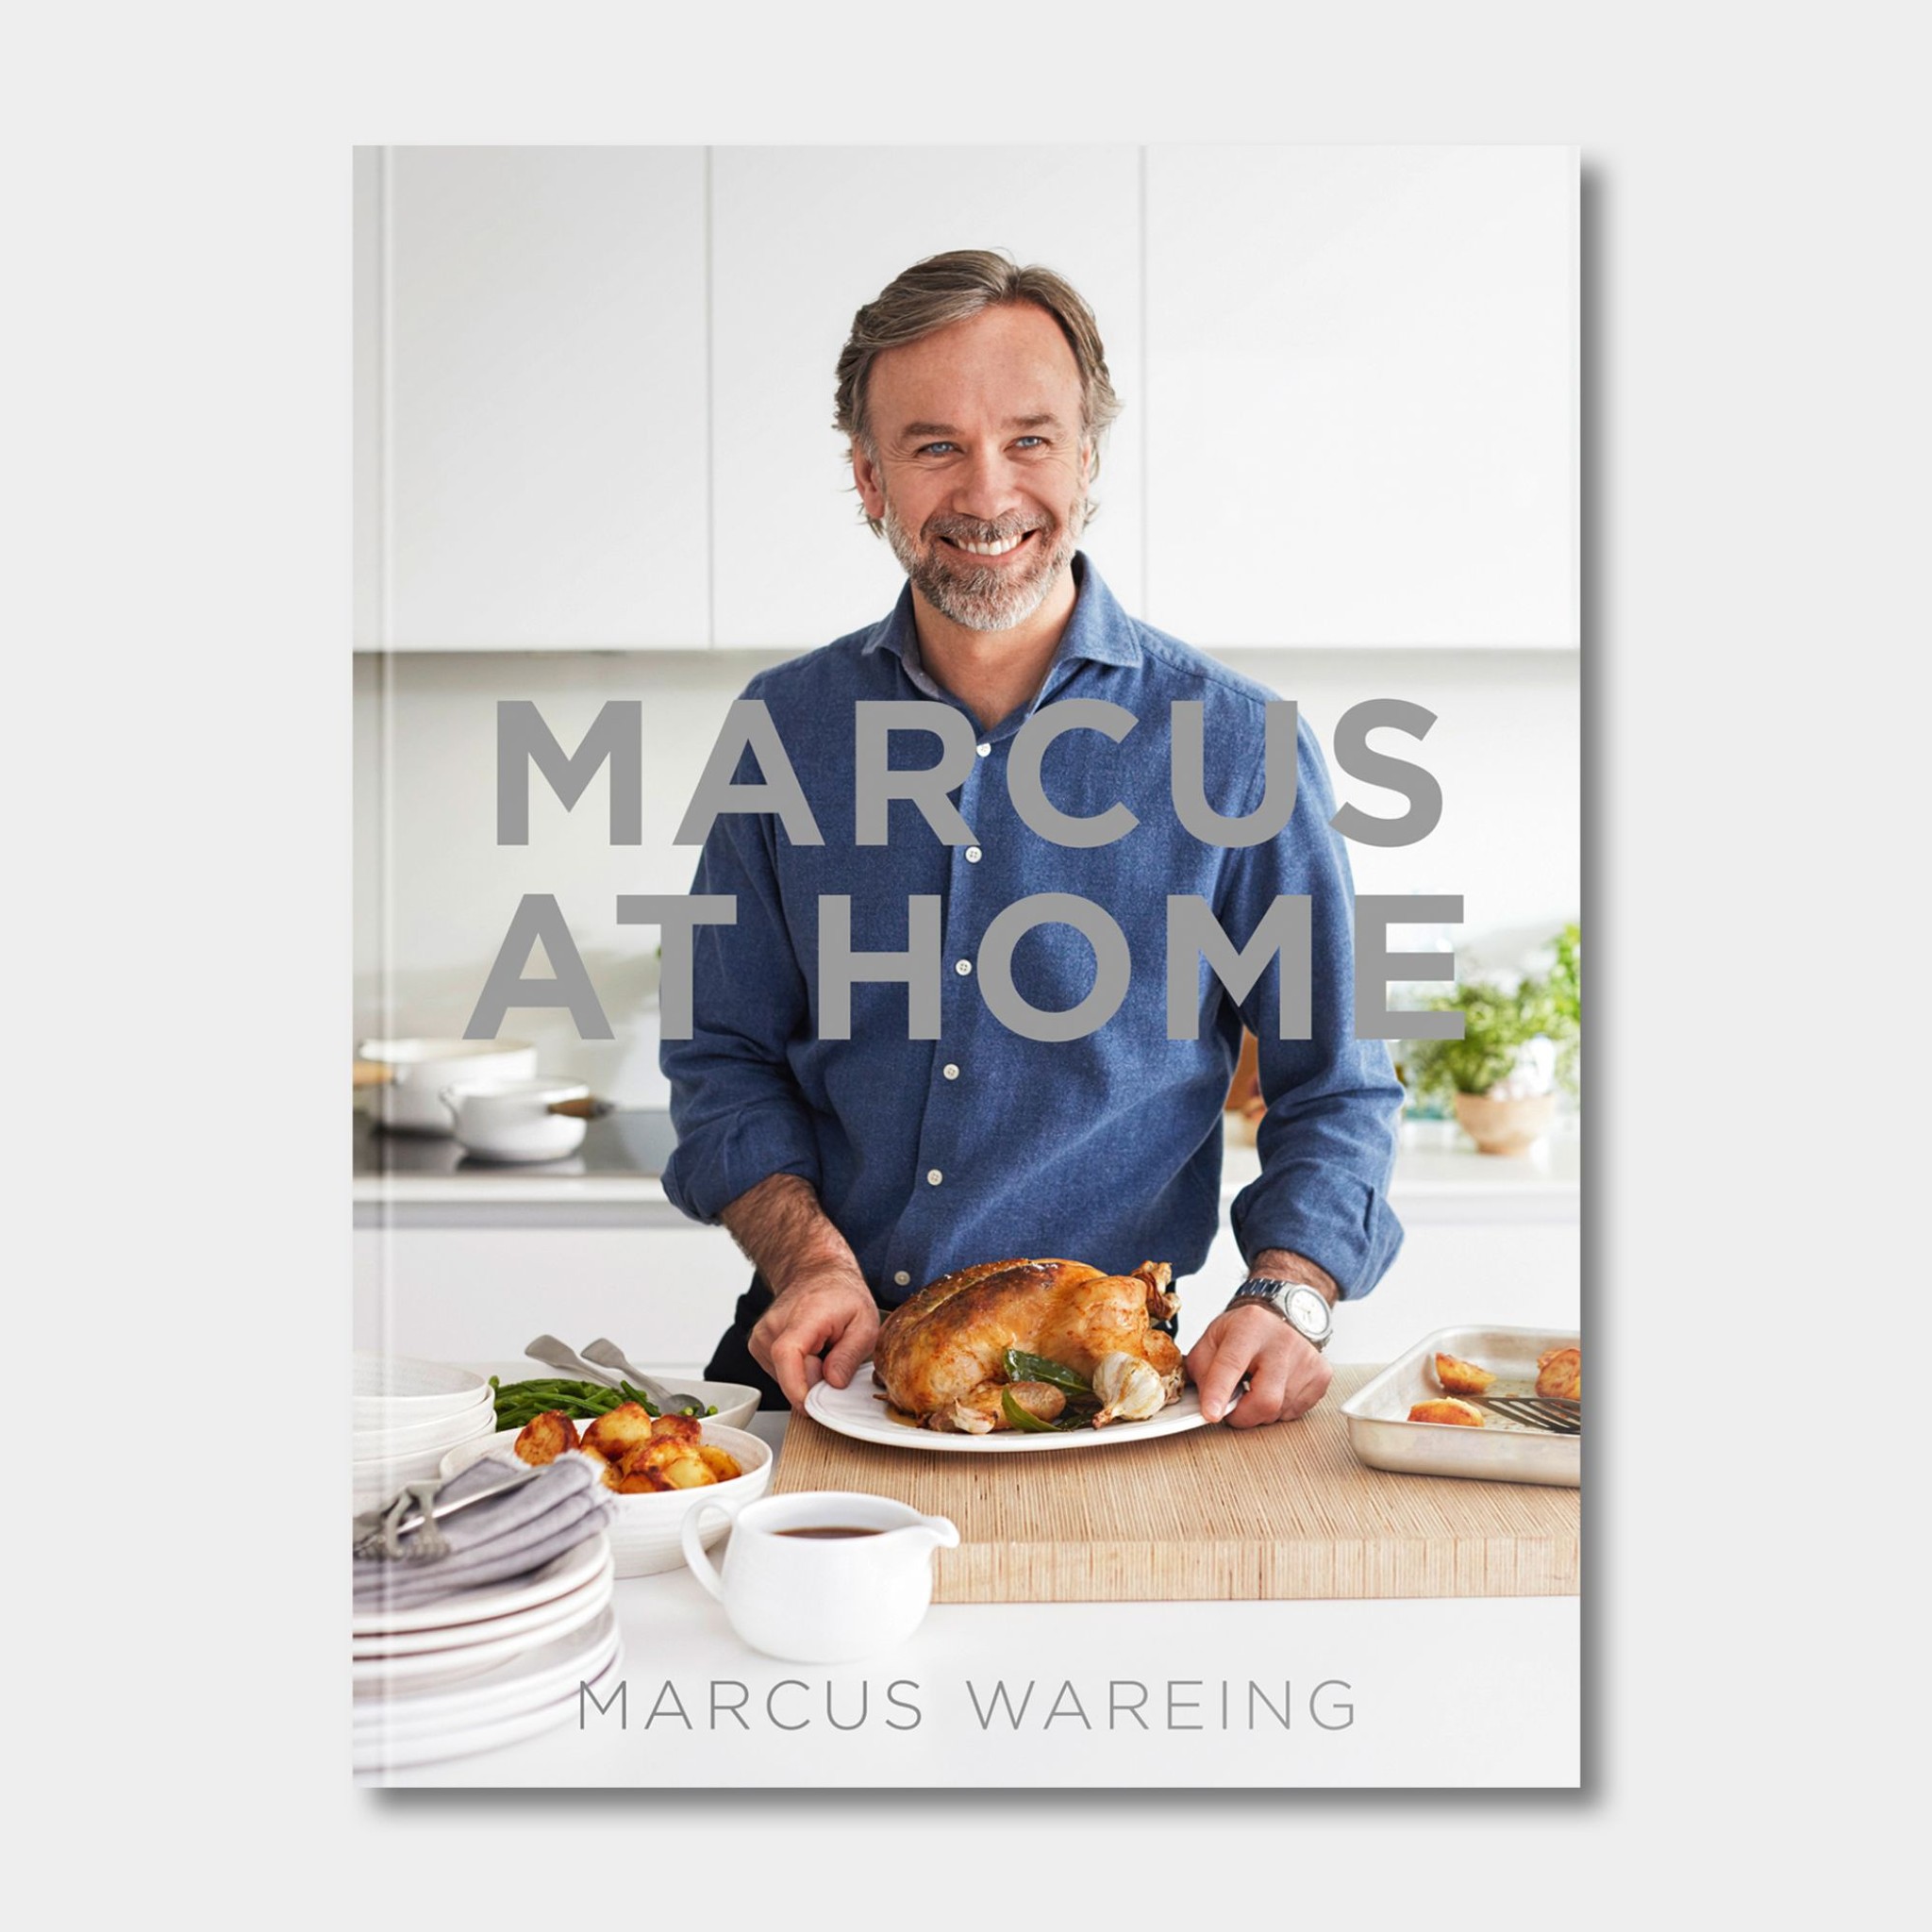 Marcus at Home cookbook by Marcus Wareing